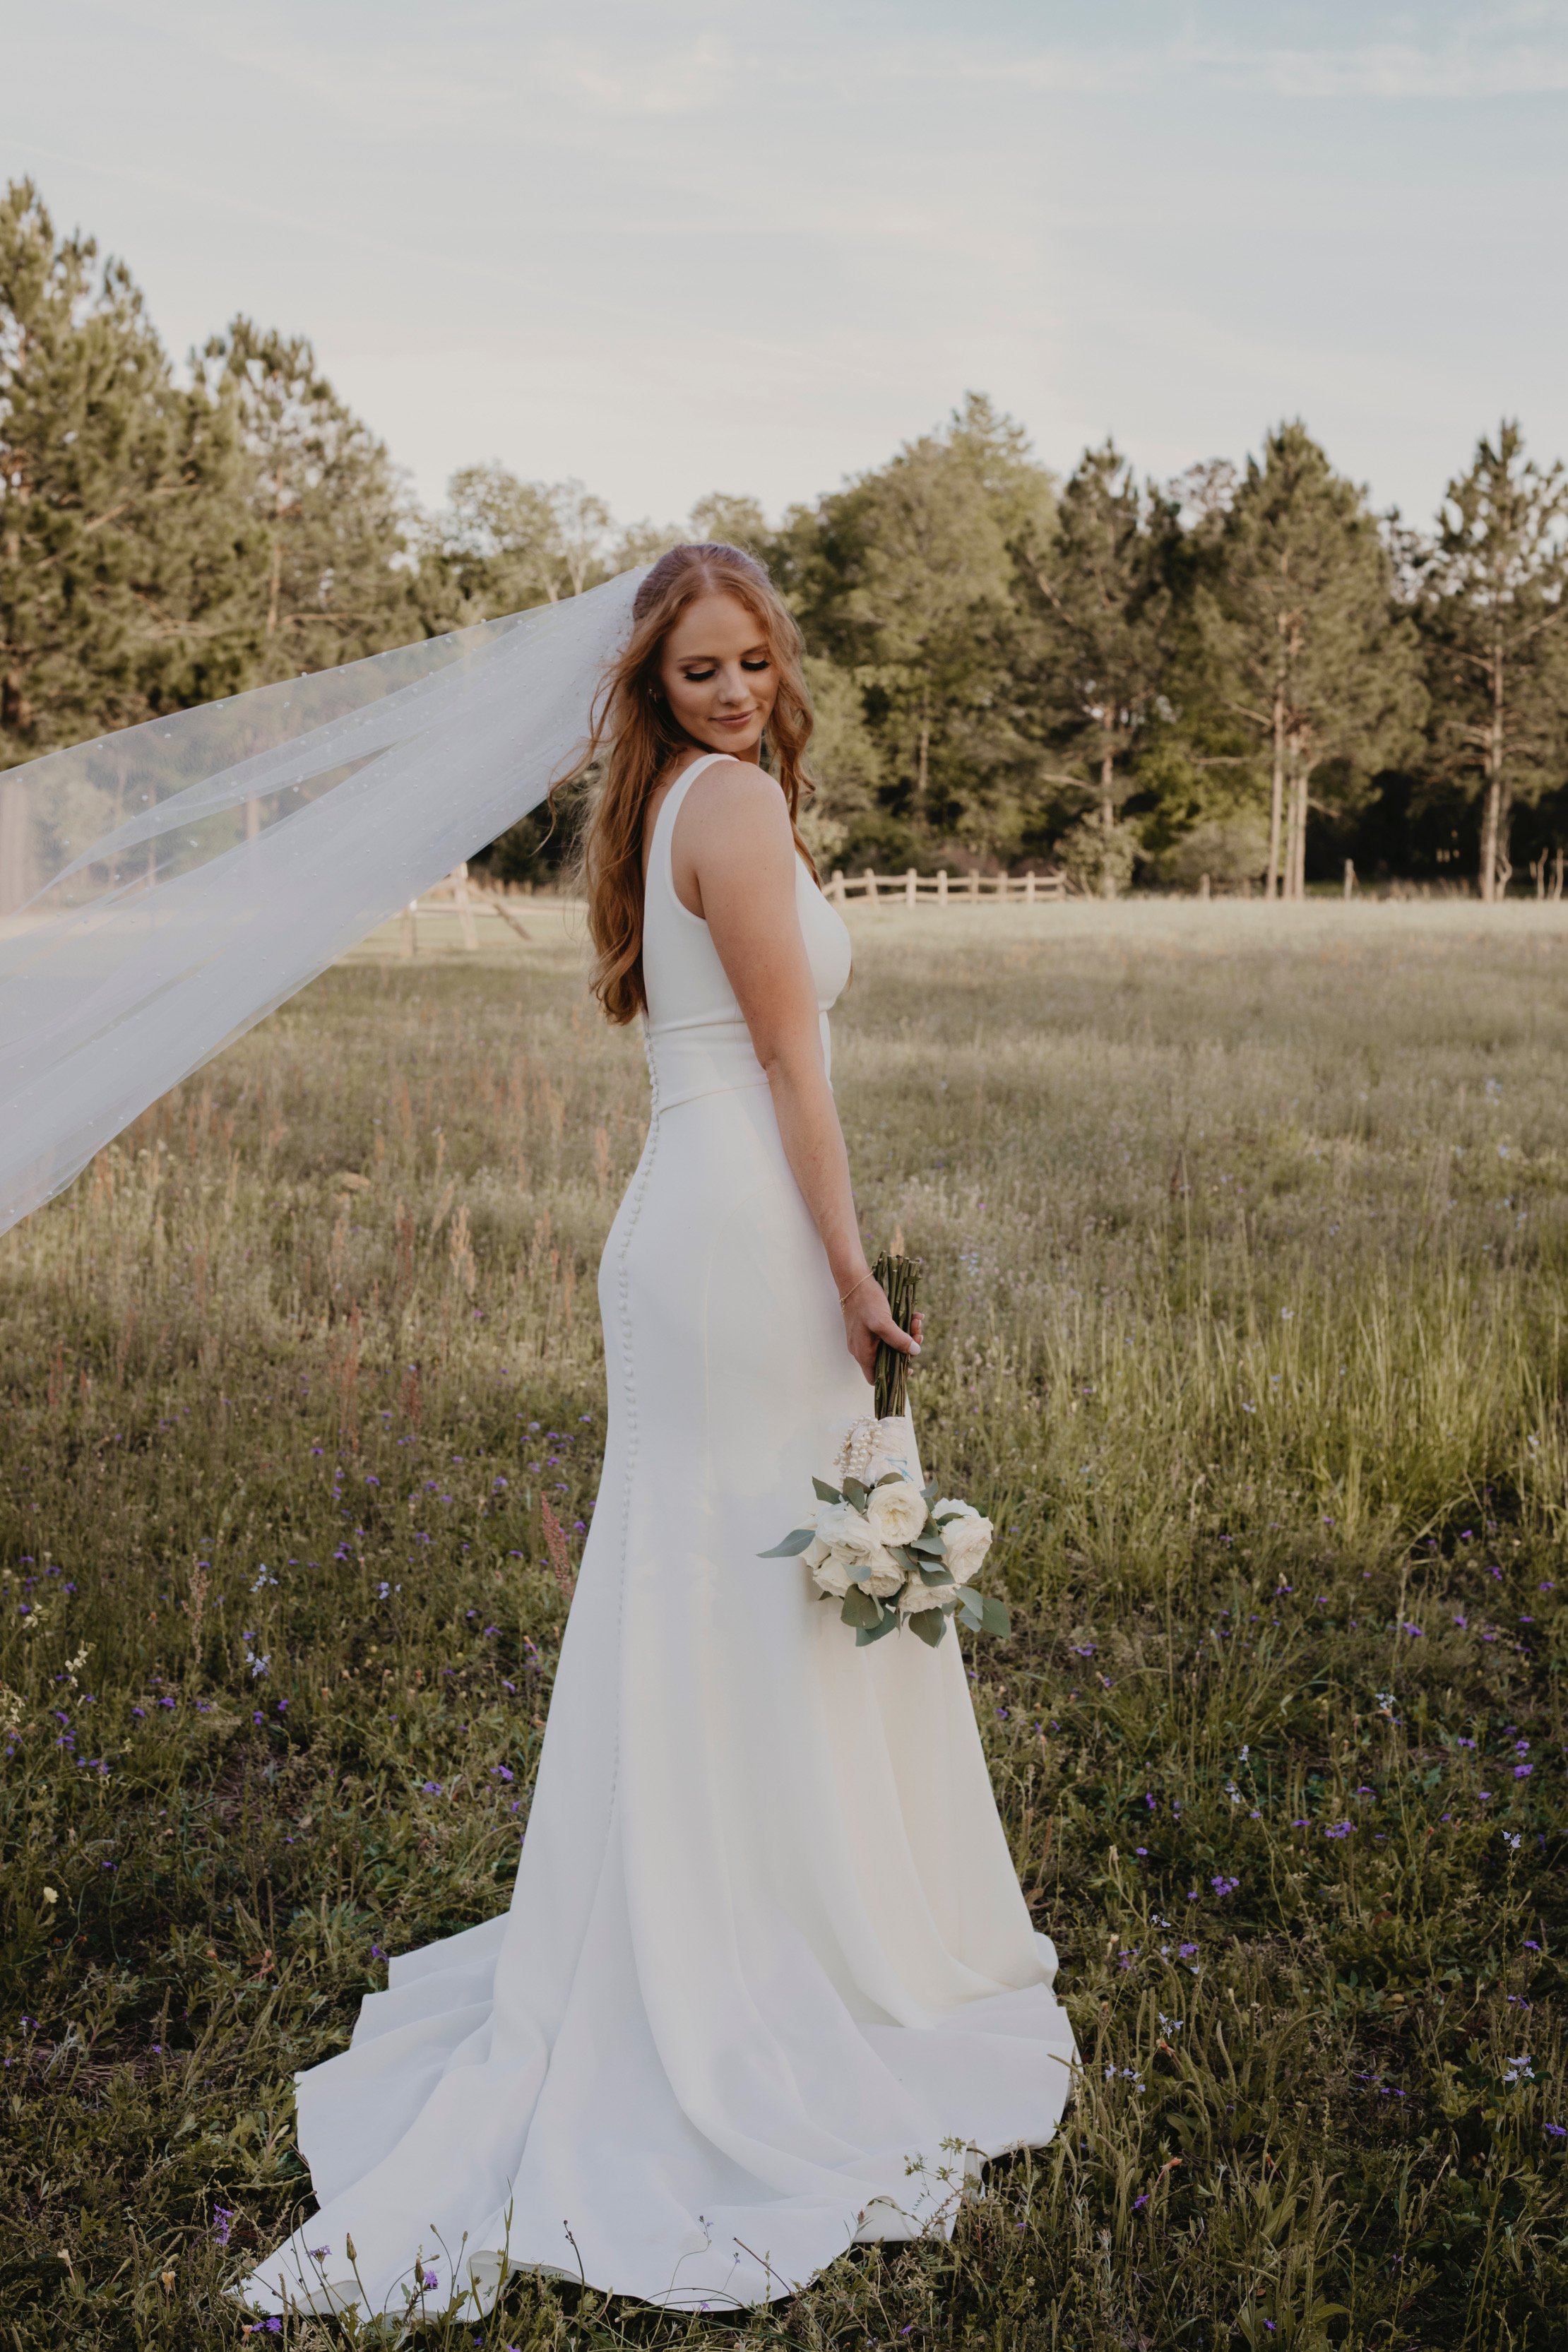 ivory-and-beau-bride-teasie-pictured-in-romantic-sleek-modern-crepe-wedding-dress-named-theodora-by-rebecca-ingram-purchased-from-savannah-bridal-shop-ivory-and-beau-1.jpeg